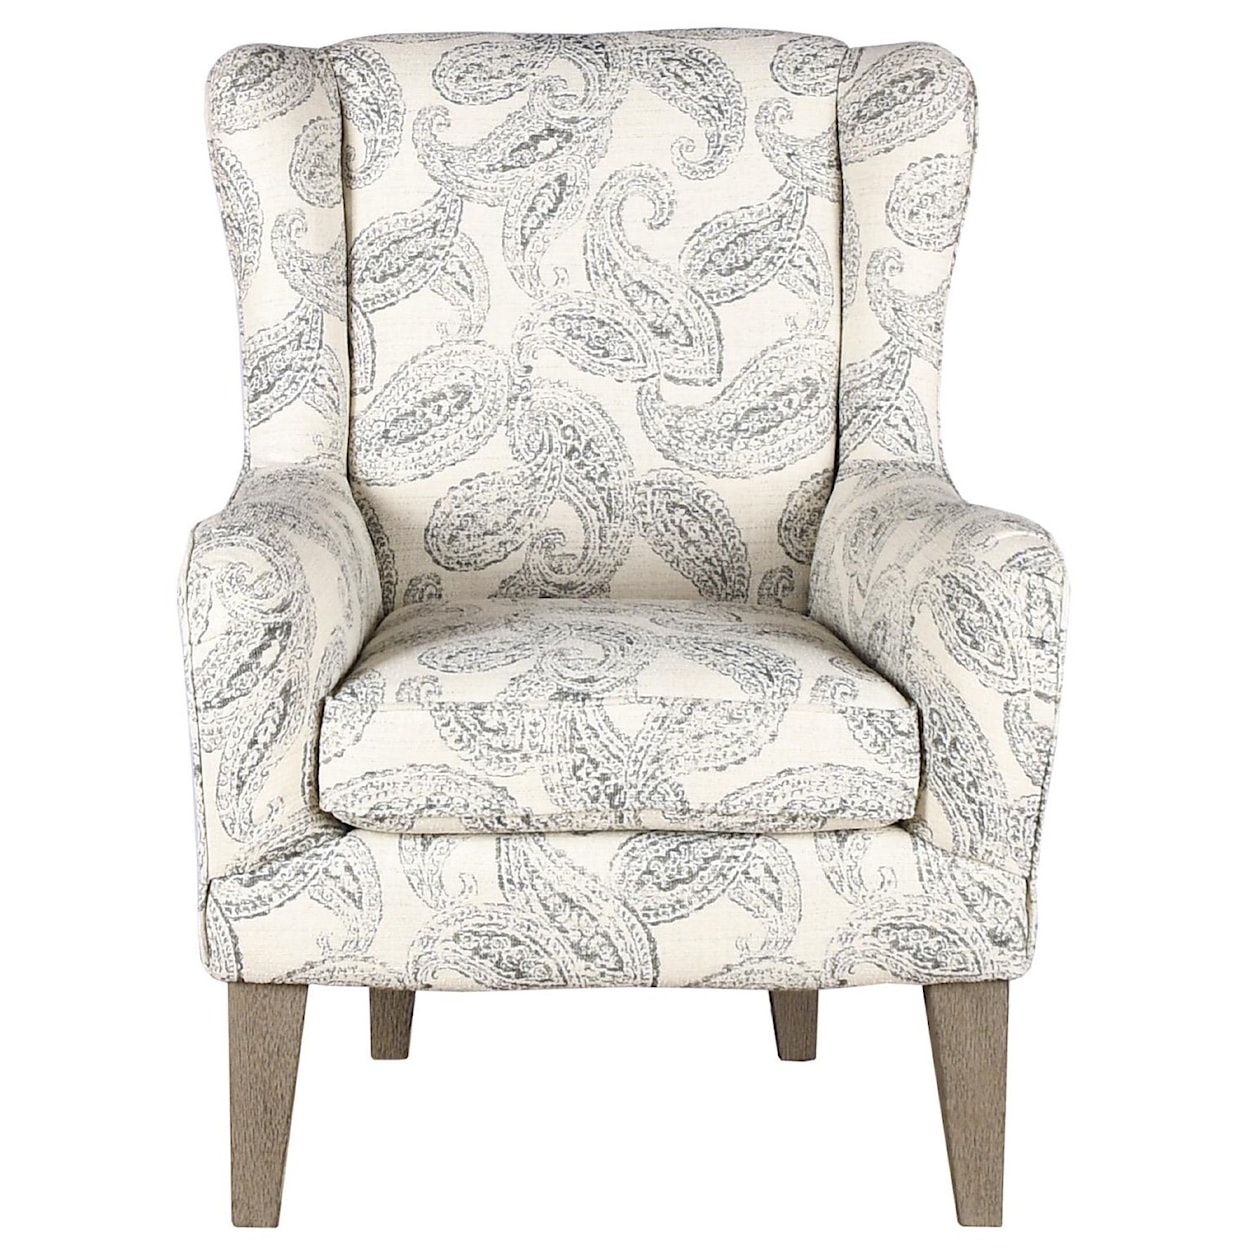 Bravo Furniture Wing Chairs Upholstered Chairs